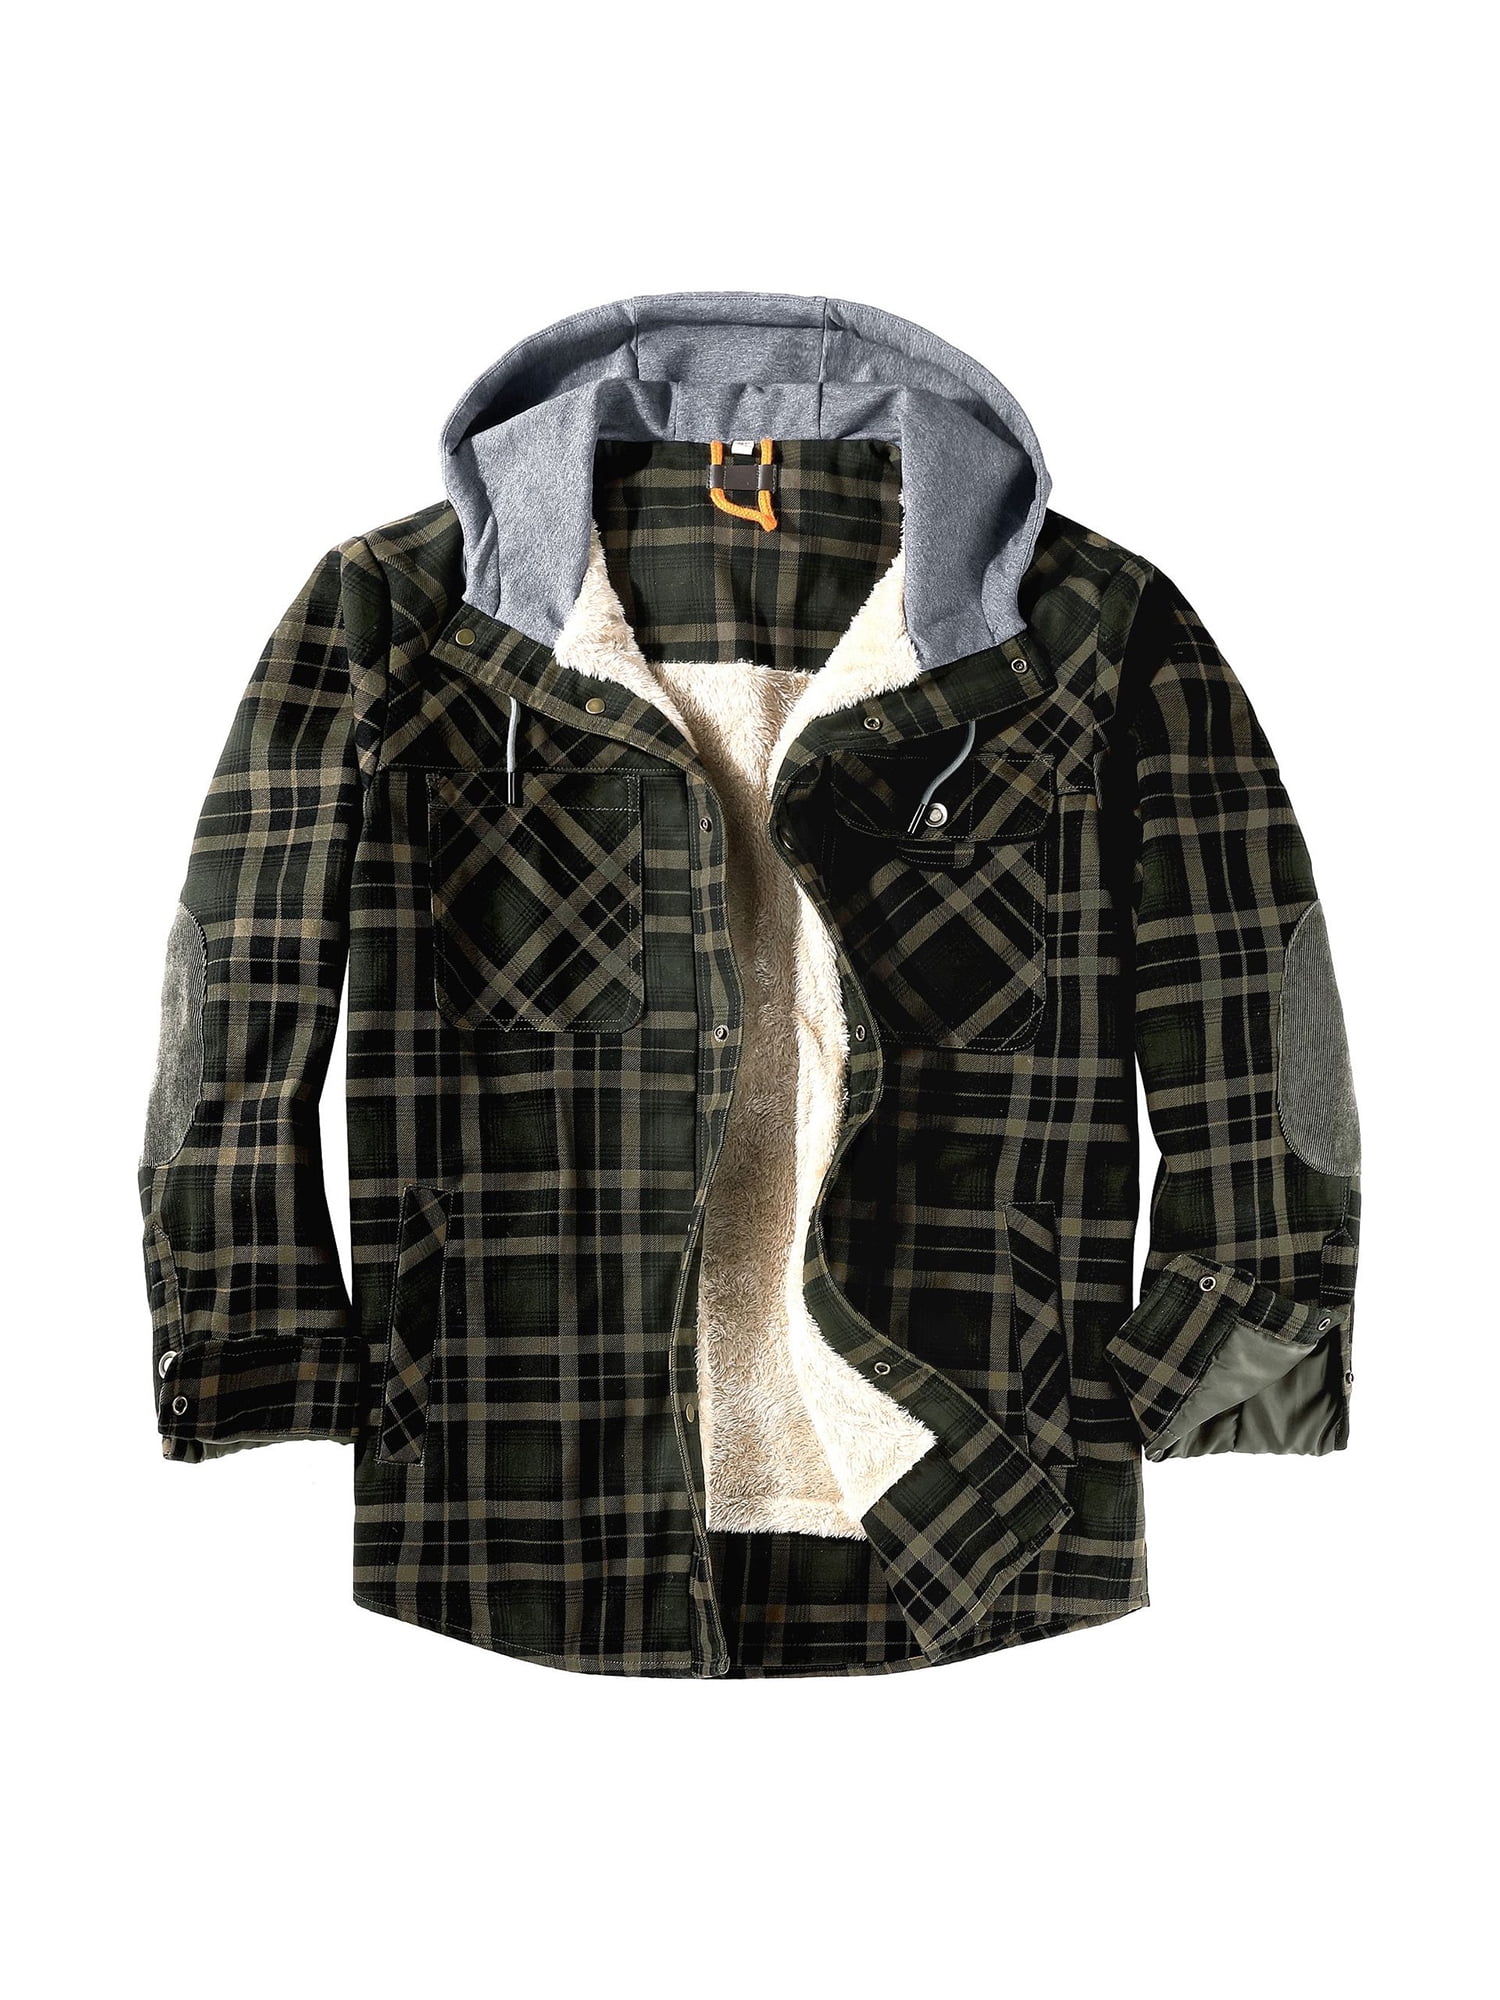 HIMONE Mens Quilted Plaid Button Down Hooded Jacket Sherpa Lined Casual ...